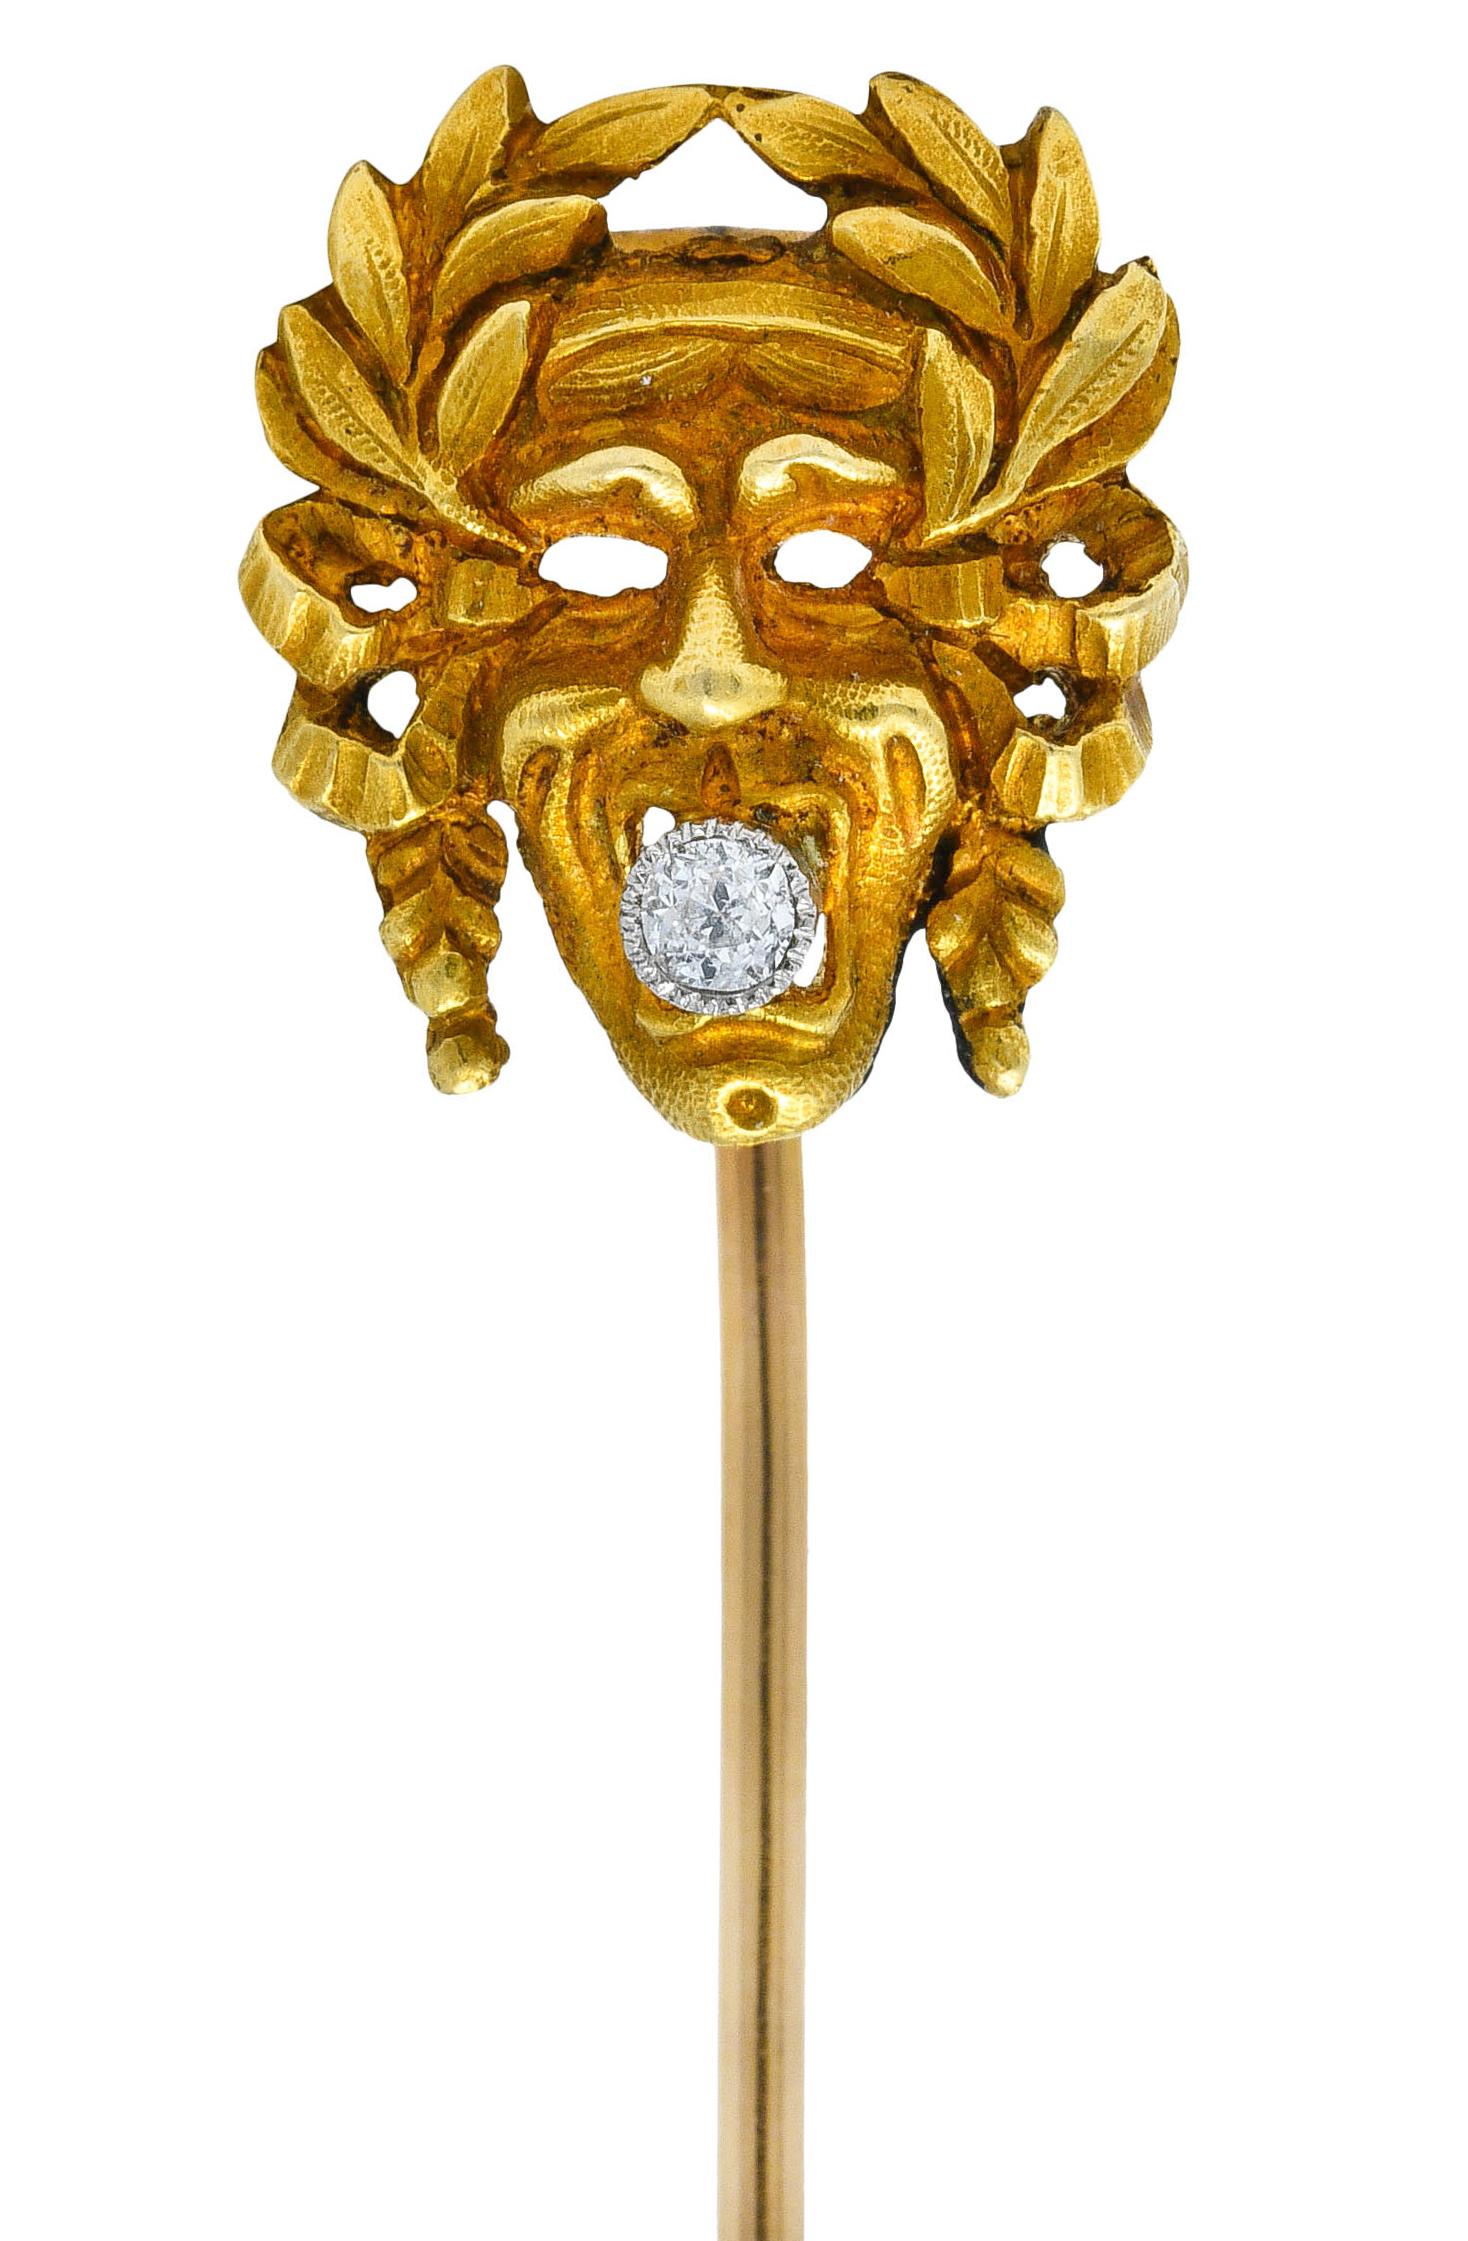 Depicting a stylized comedy mask adorned with a ribboned crown of laurels

Clutching an old European cut diamond in its mouth

Bezel set in platinum while weighing approximately 0.05 carat - eye clean and white

Tested as 18 karat gold

Circa: